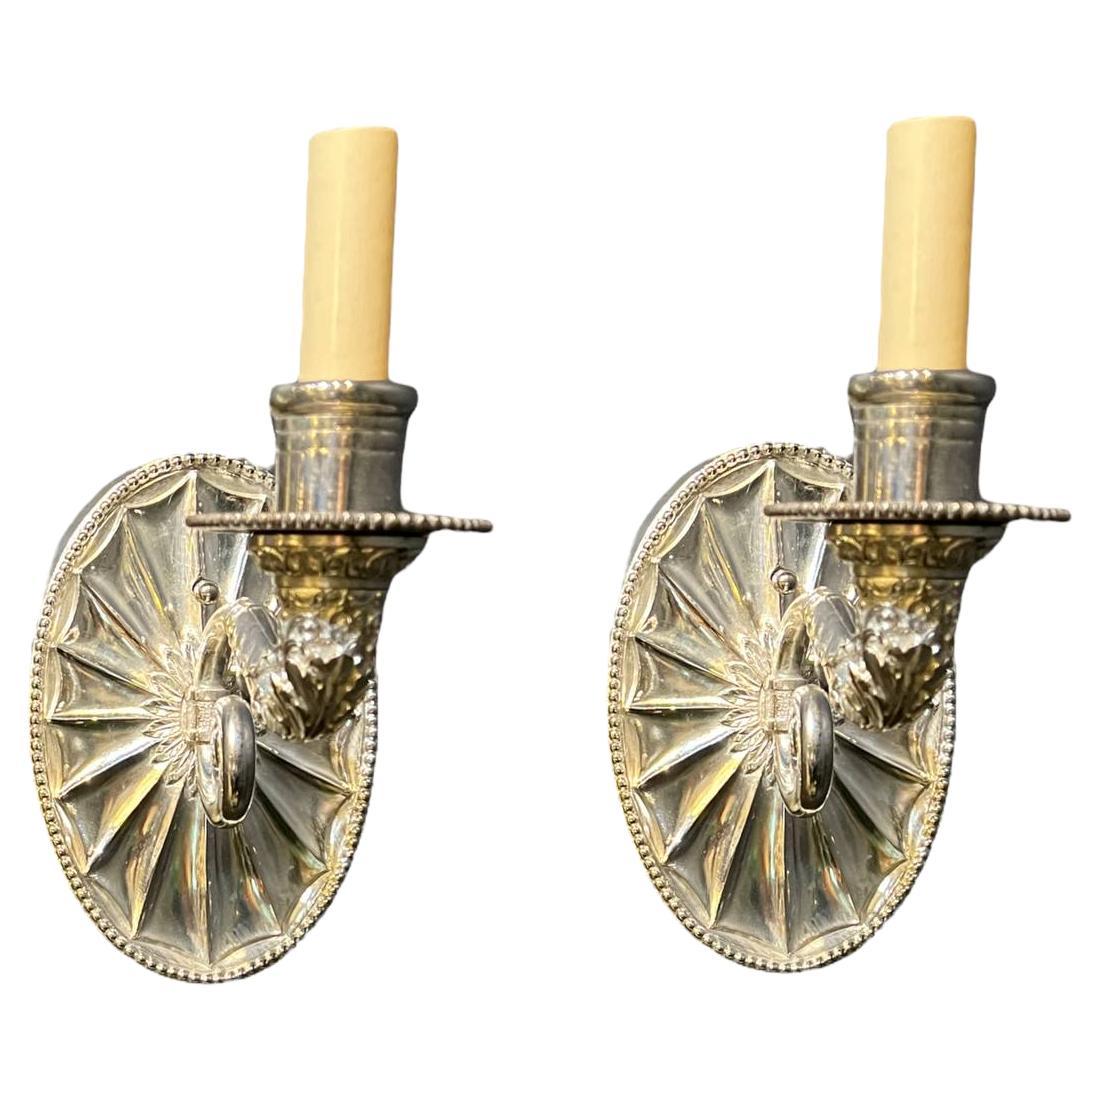 American Empire Wall Lights and Sconces